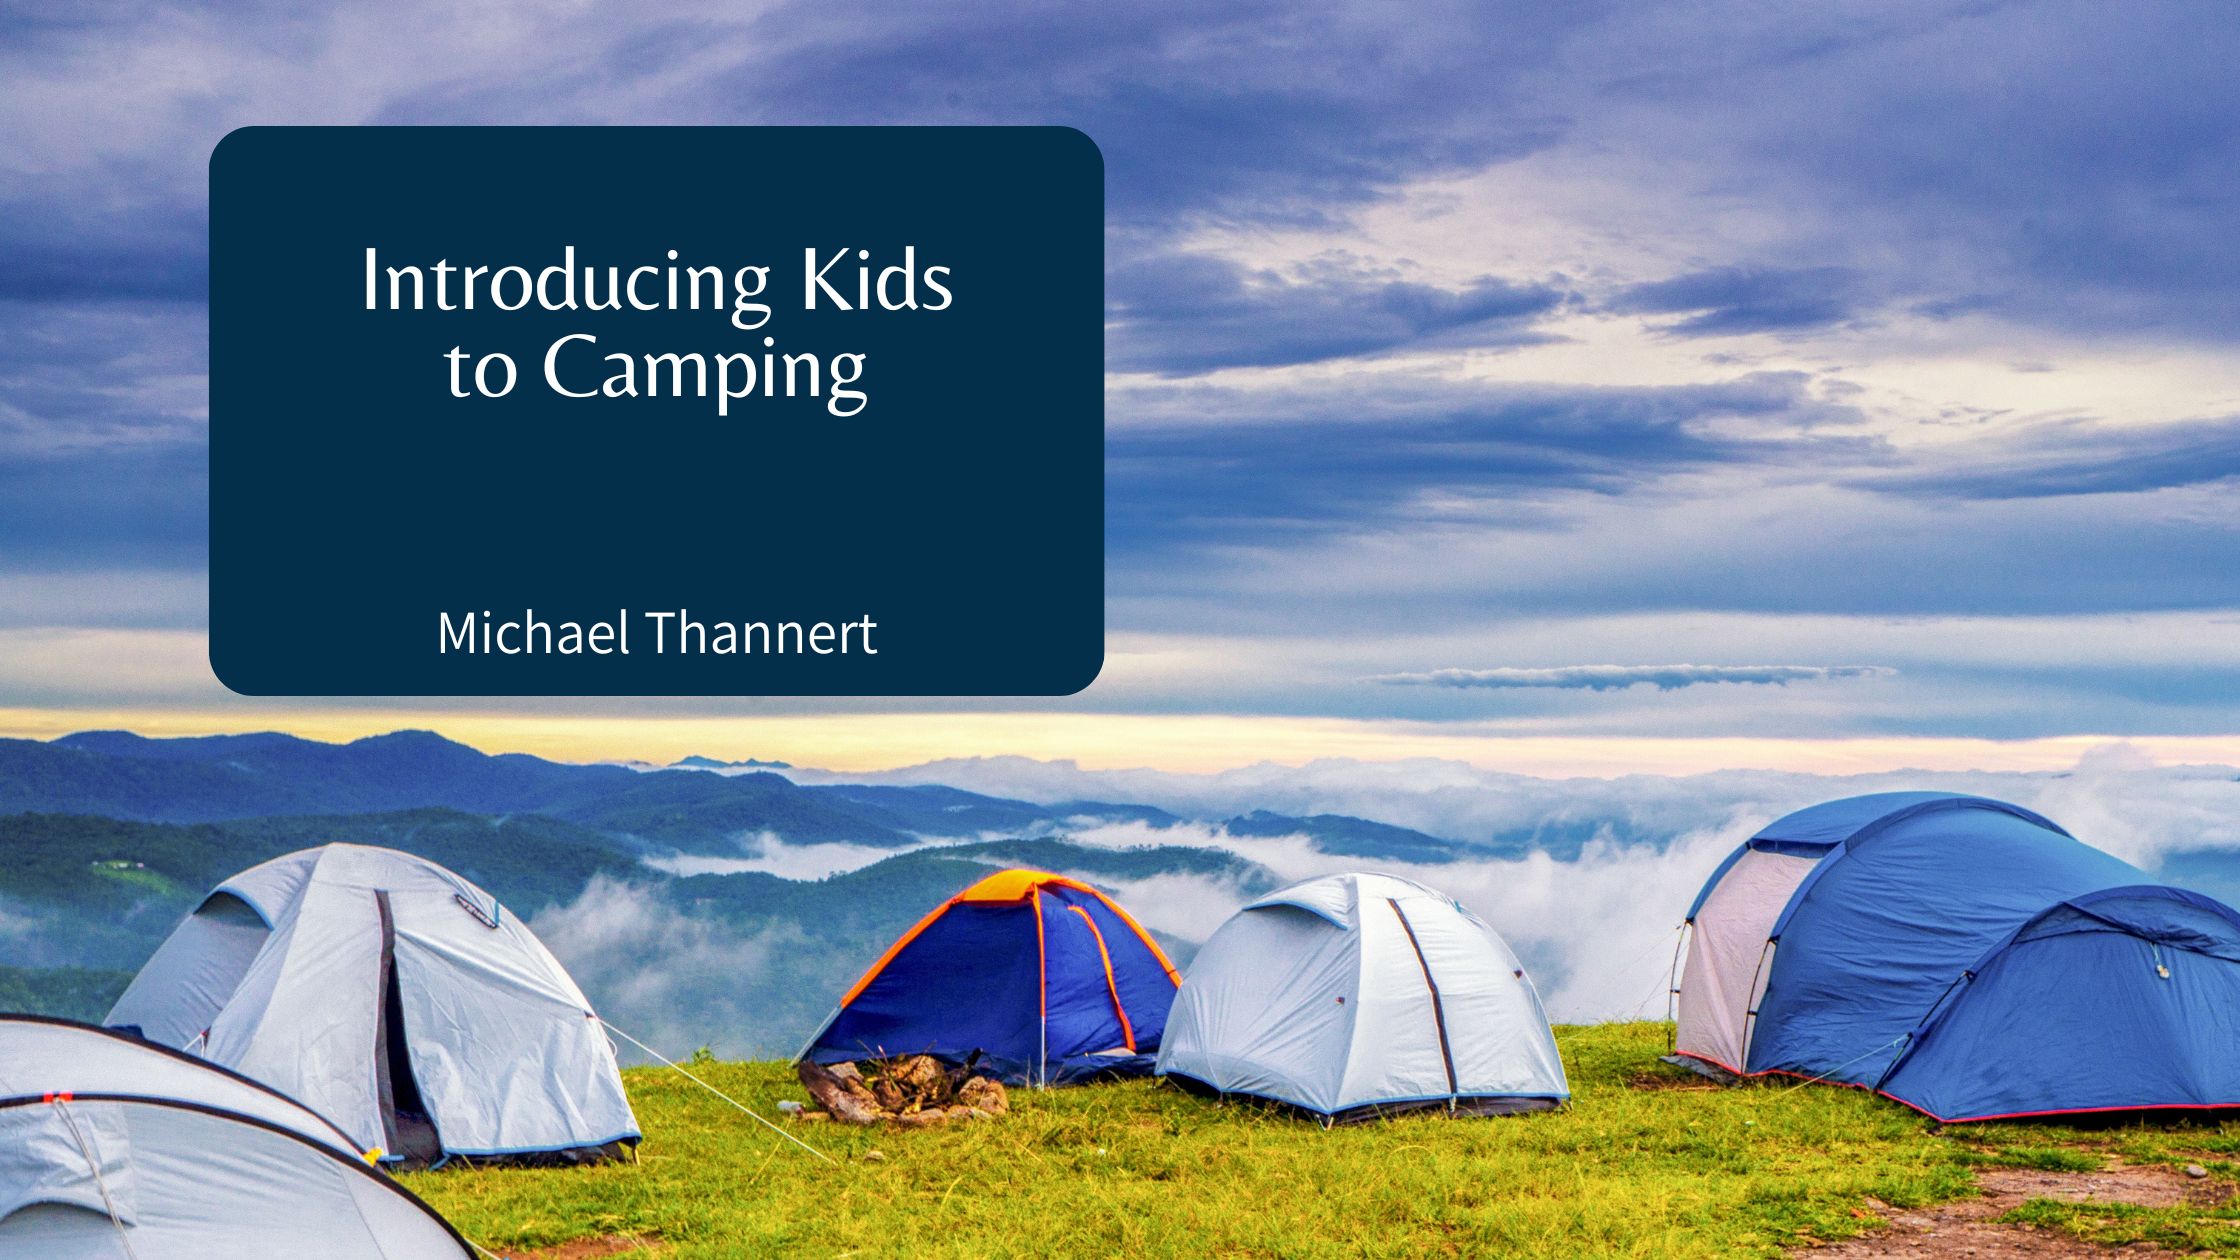 Michael Thannert - Introducing Kids to Camping